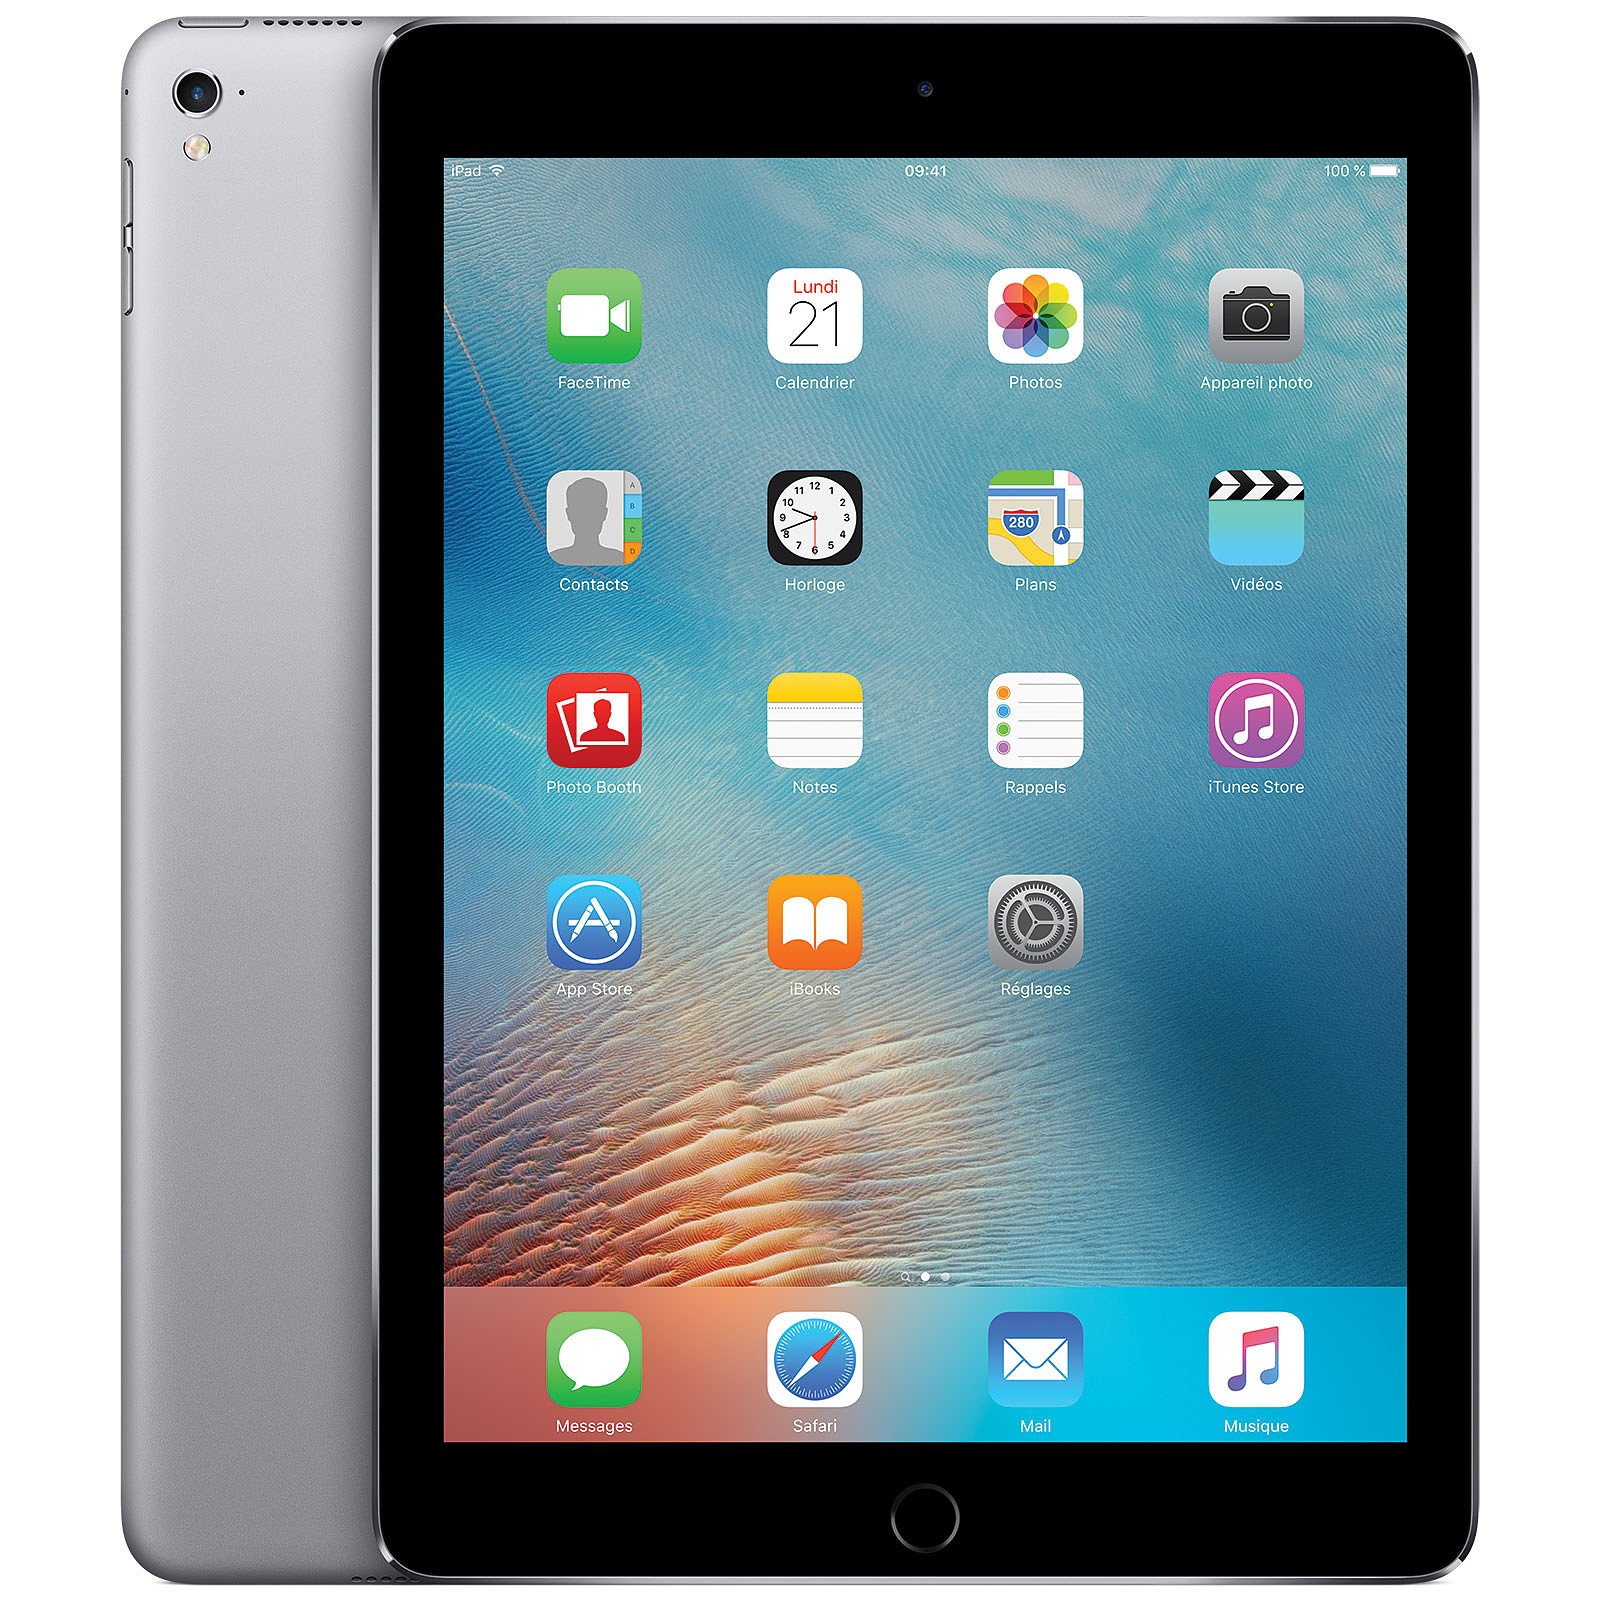 Apple iPad Pro 9.7" Wi-Fi 32 Go Gris Sideral · Reconditionne - Tablette tactile Apple